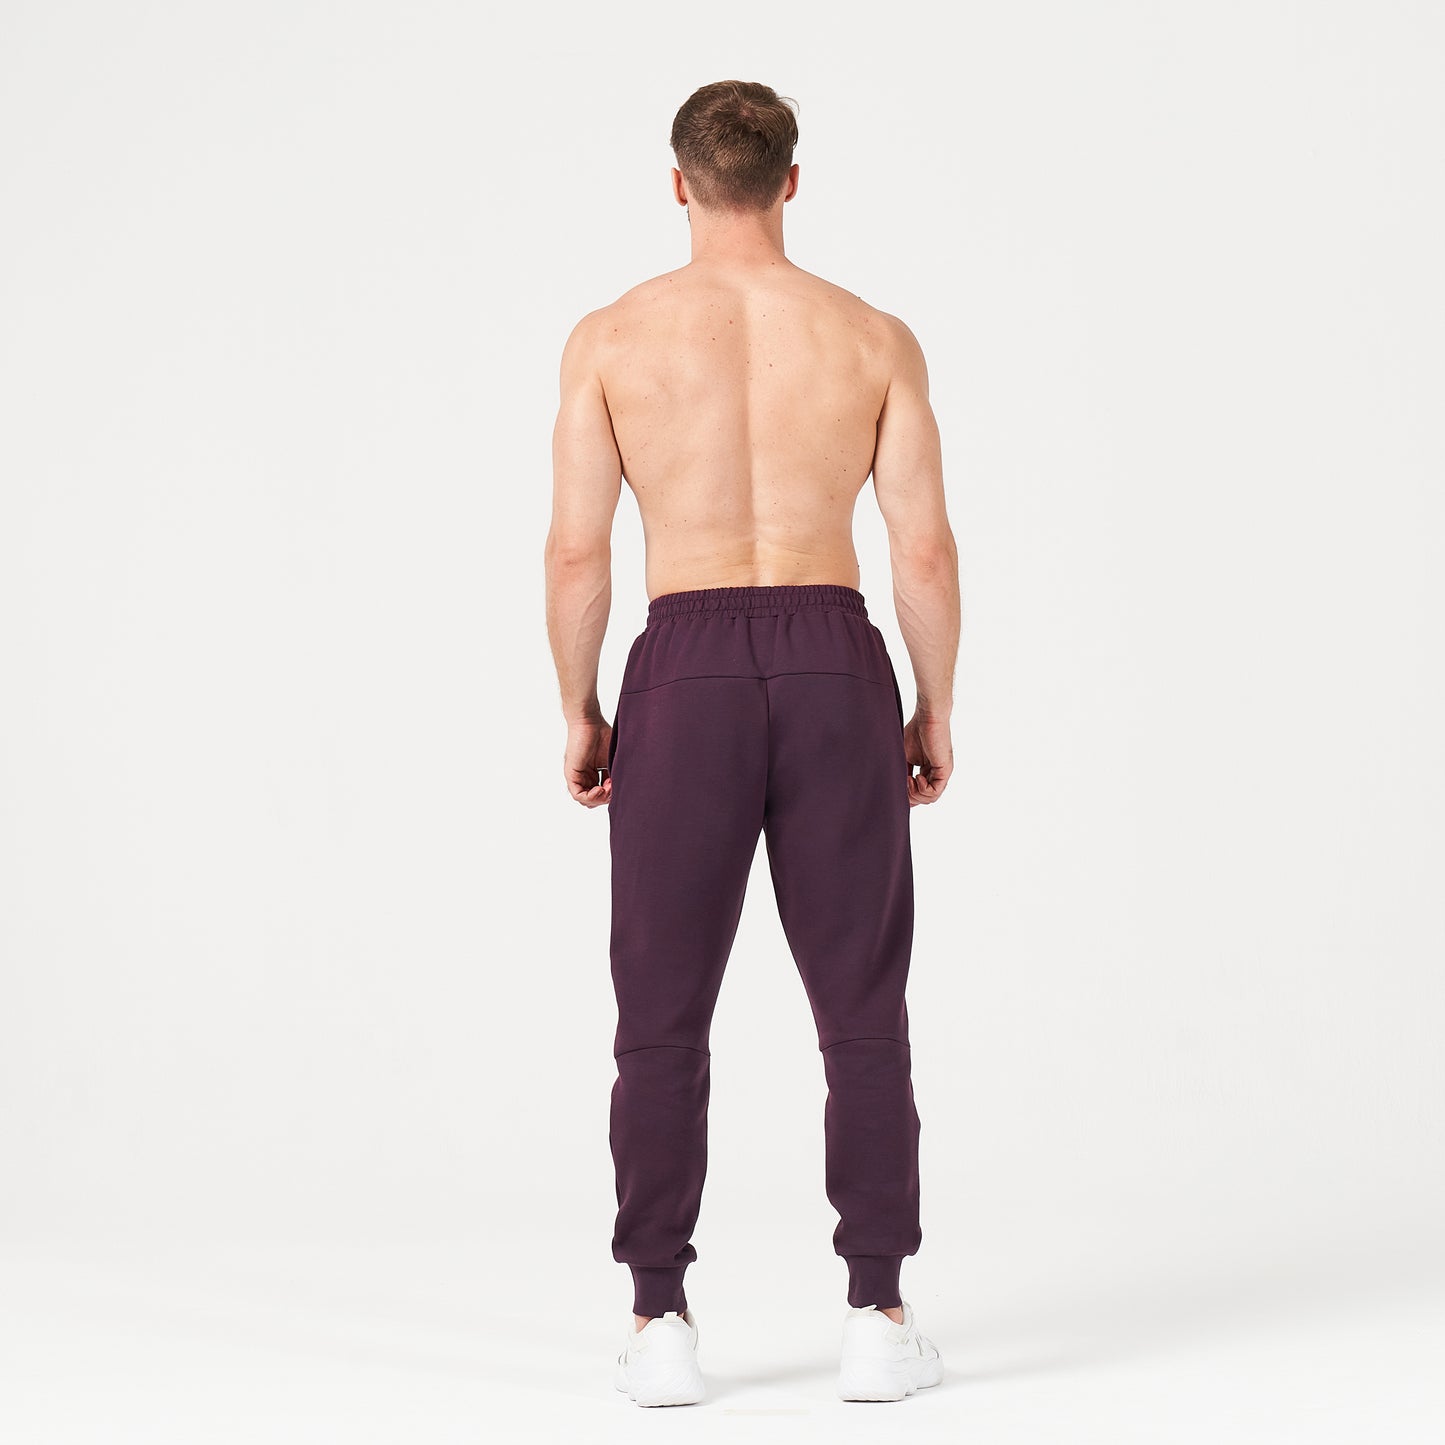 squatwolf-gym-wear-lab360-drylite-joggers-plum-perfect-workout-pants-for-men